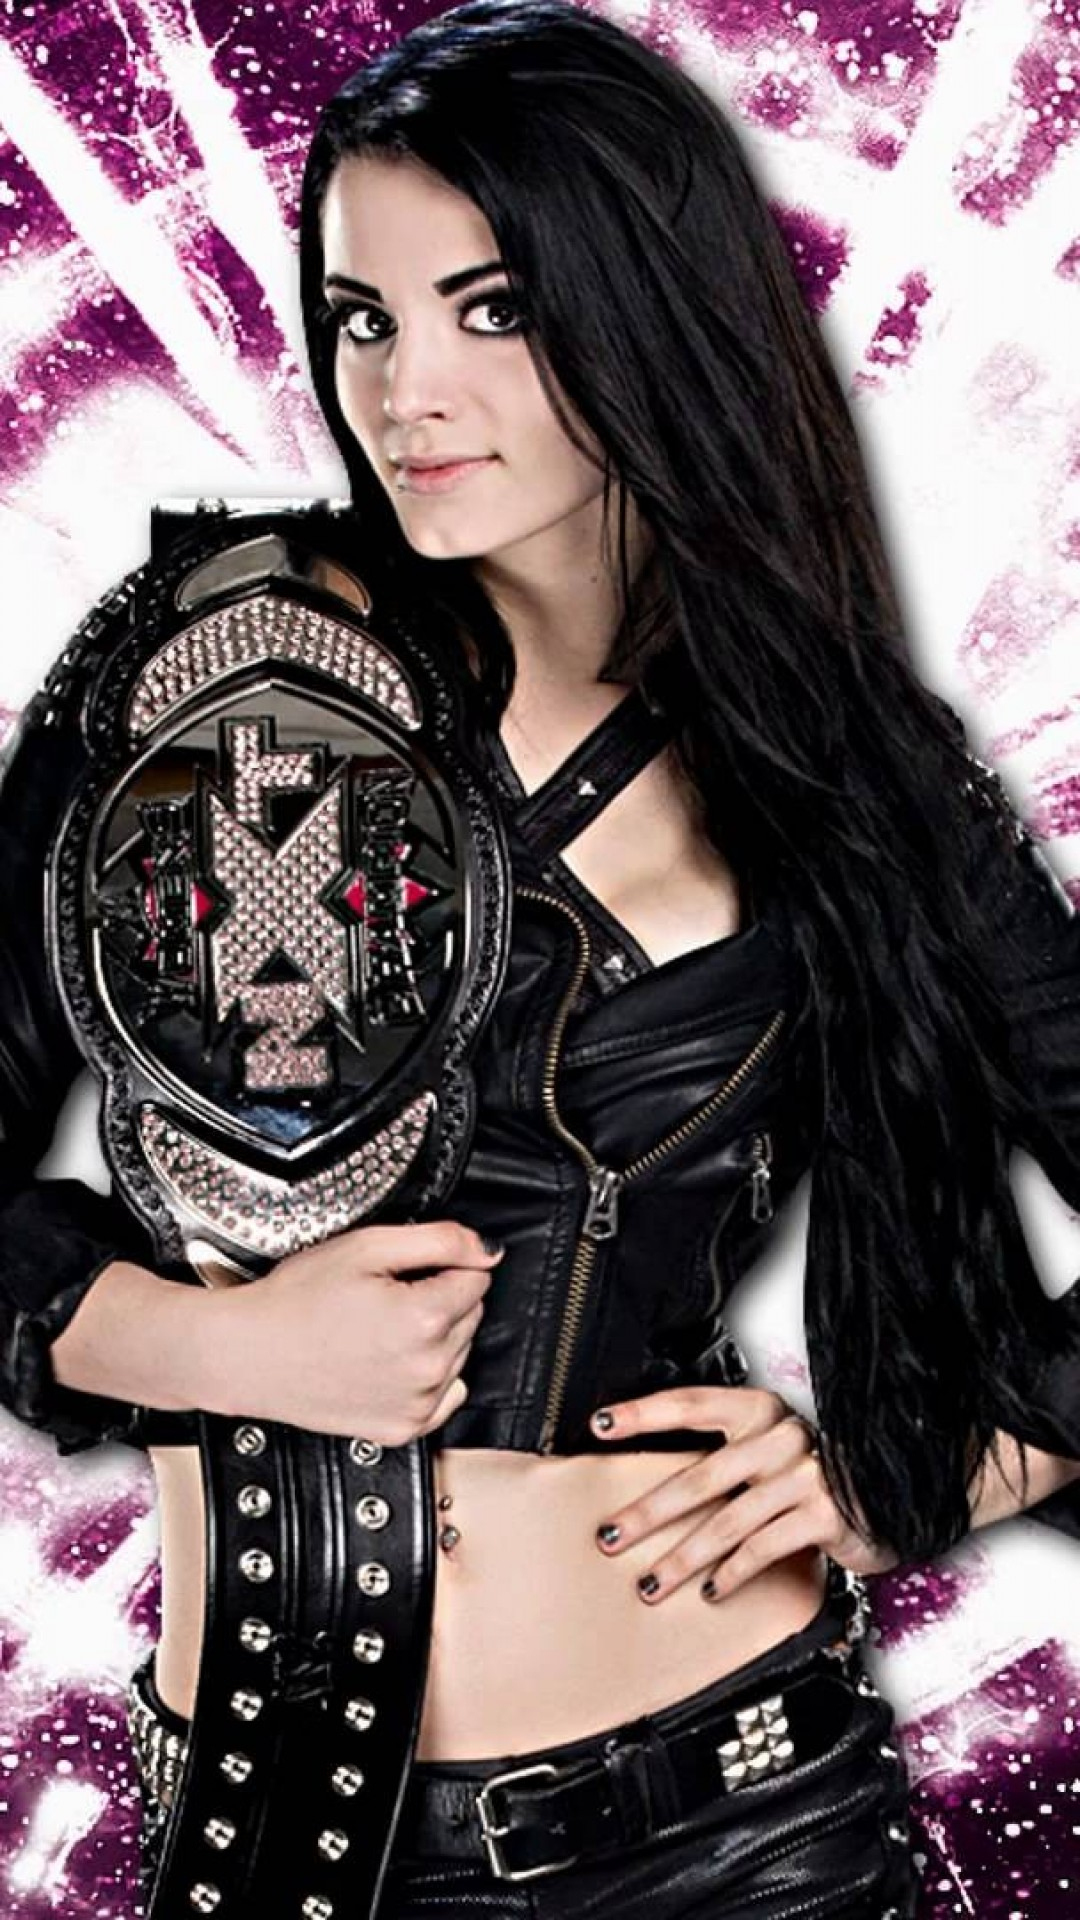 1080x1920 Wwe Paige Wallpaper posted by Michelle Anders